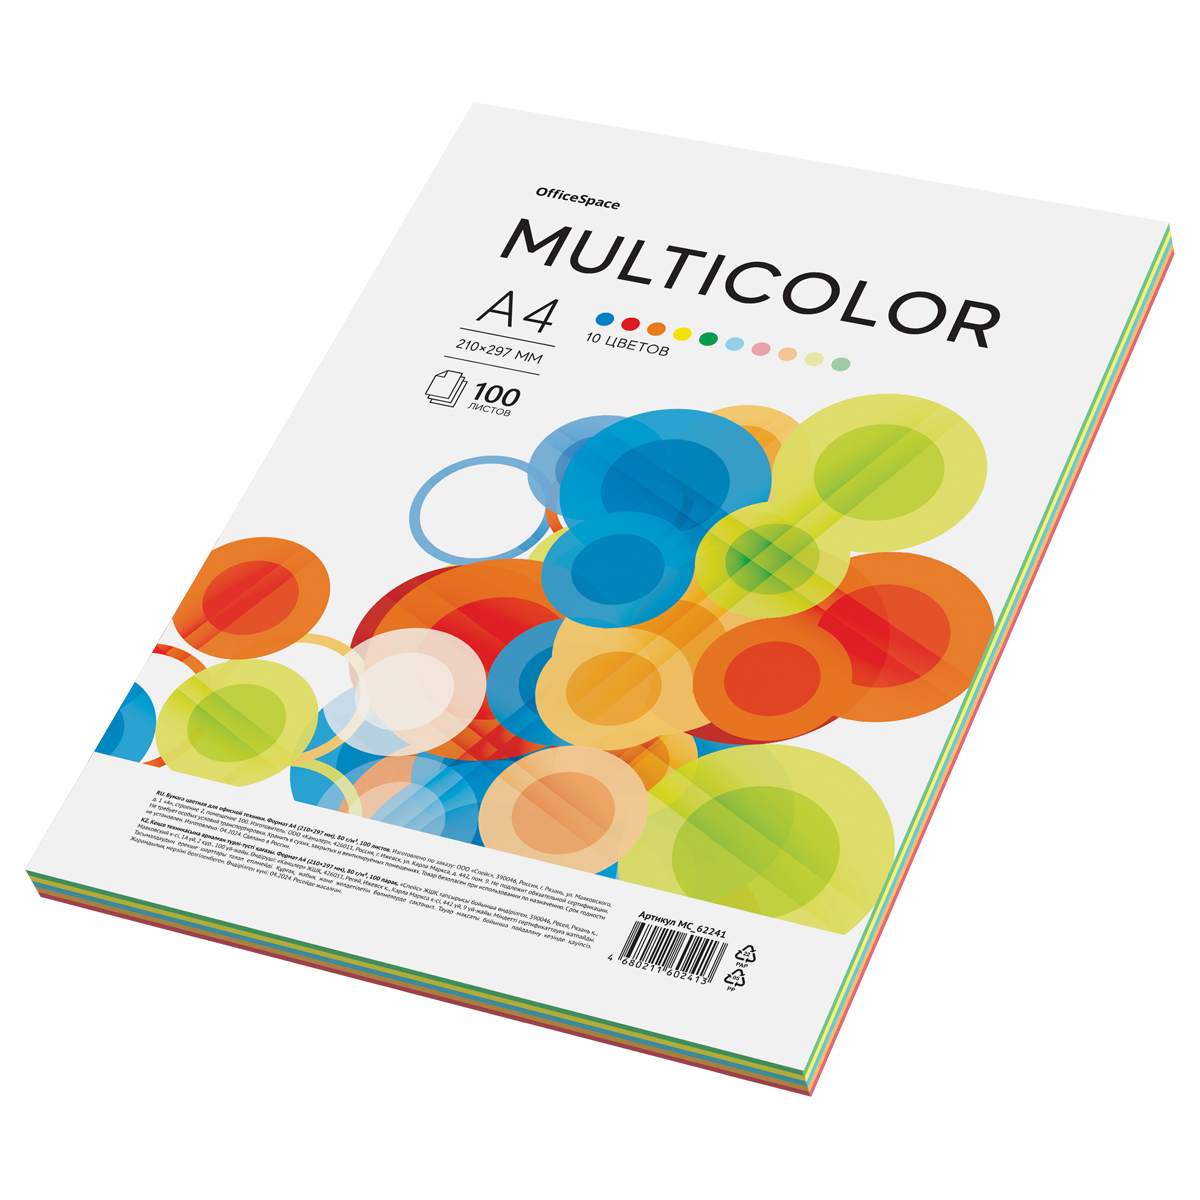   OfficeSpace "Multicolor", 4, 80/2, 100., (10 ) 